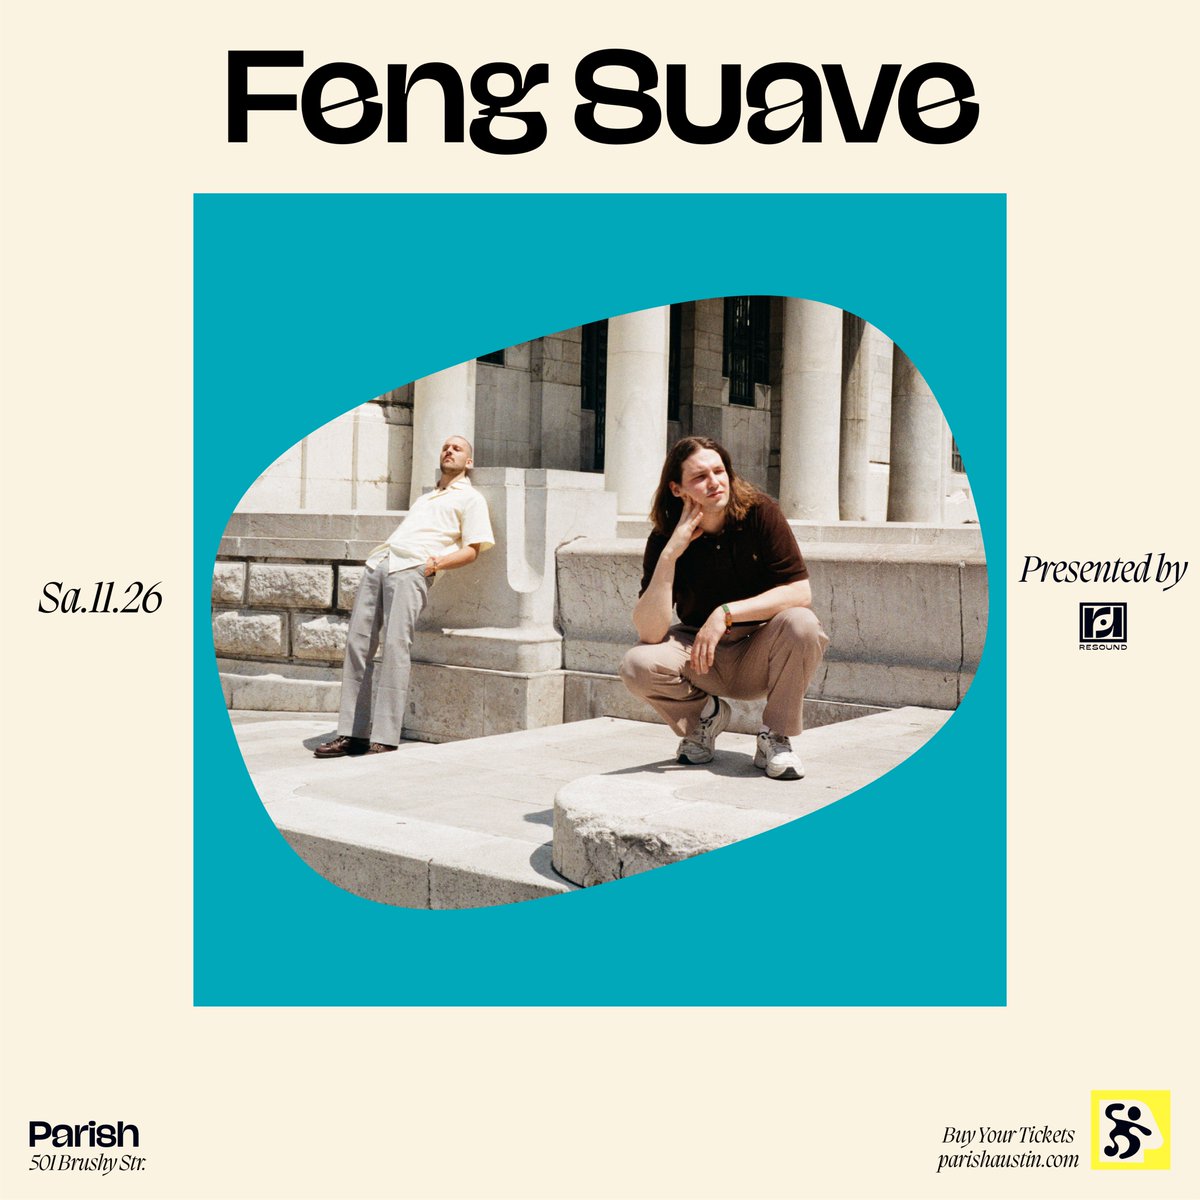 Get ready to GROOVE @resoundpresents is bringing Dutch songwriter and producer duo @fengsuave to Parish on Nov 26th! Set those alarms, tickets go on sale Friday @10am 🌻